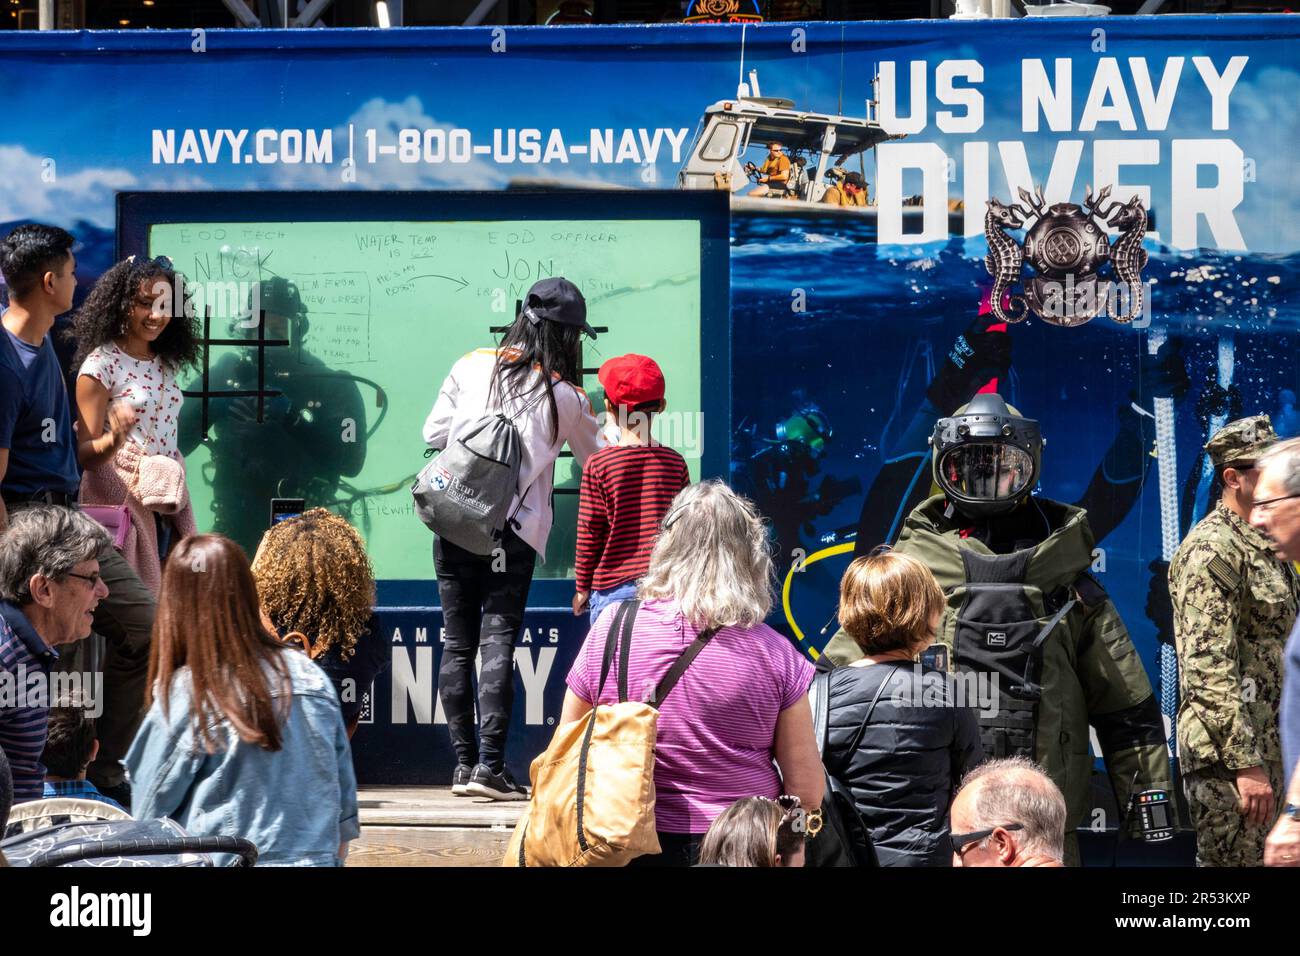 Crowds gather for fleet week in Times Square at the US Navy underwater diver tank, 2023, New York City, United States Stock Photo